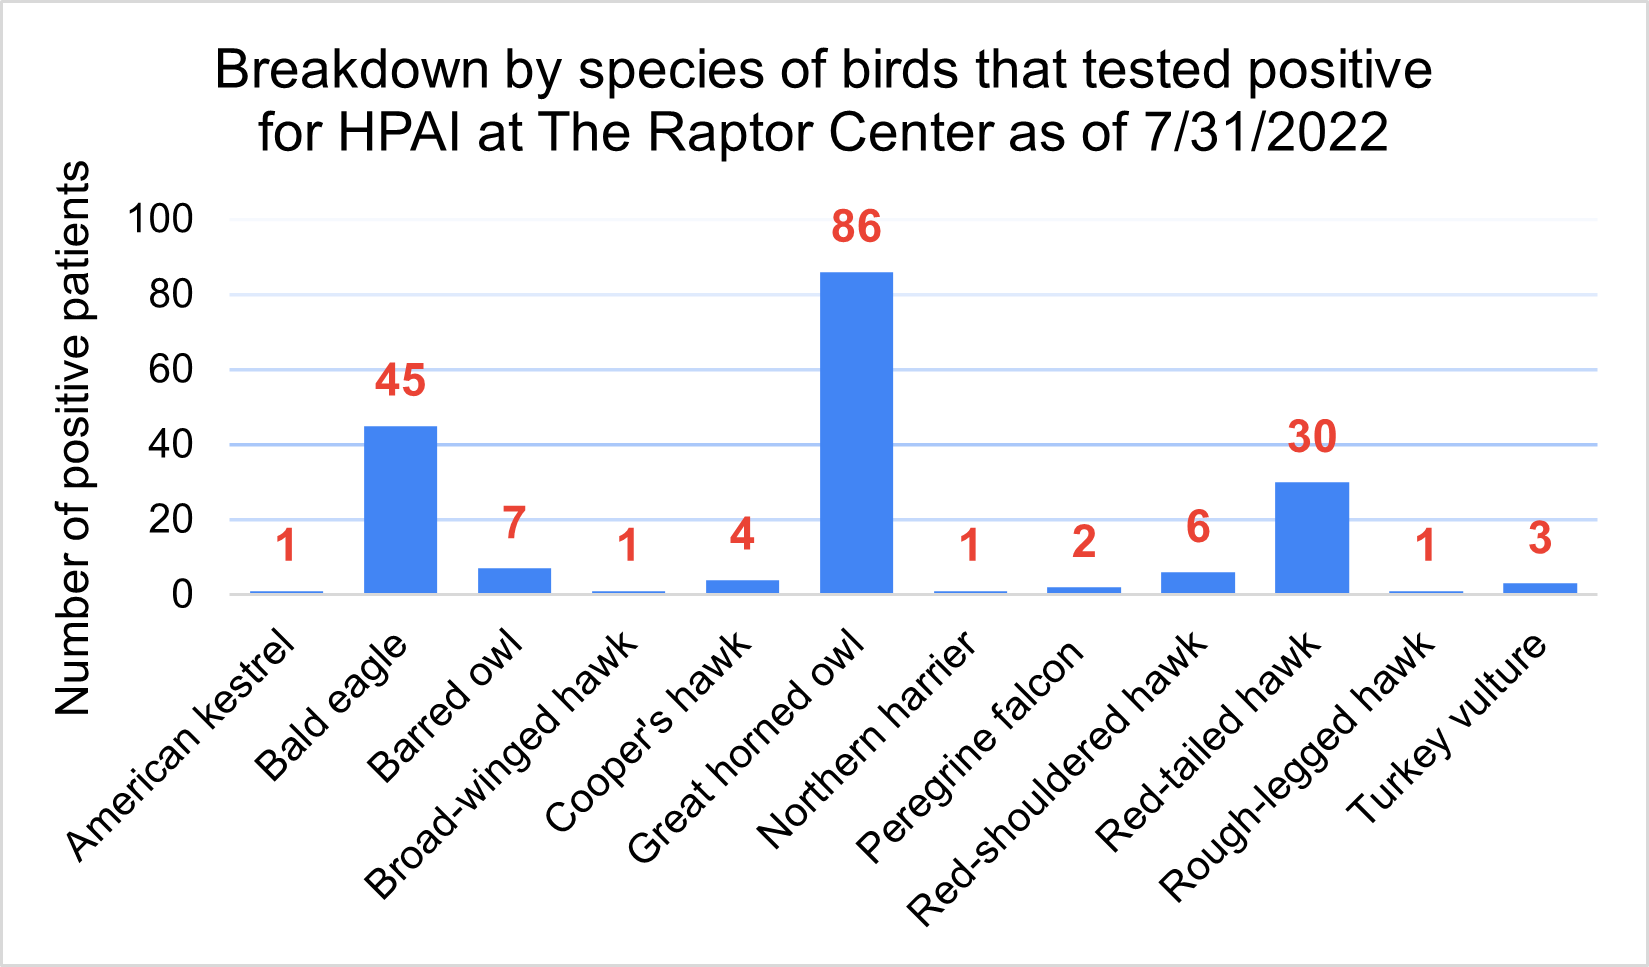 Bar chart showing HPAI positive cases at The Raptor Center by species. Great horned owl has the most with 86 cases, followed by bald eagle at 45 and red-tailed hawk at 30 cases.